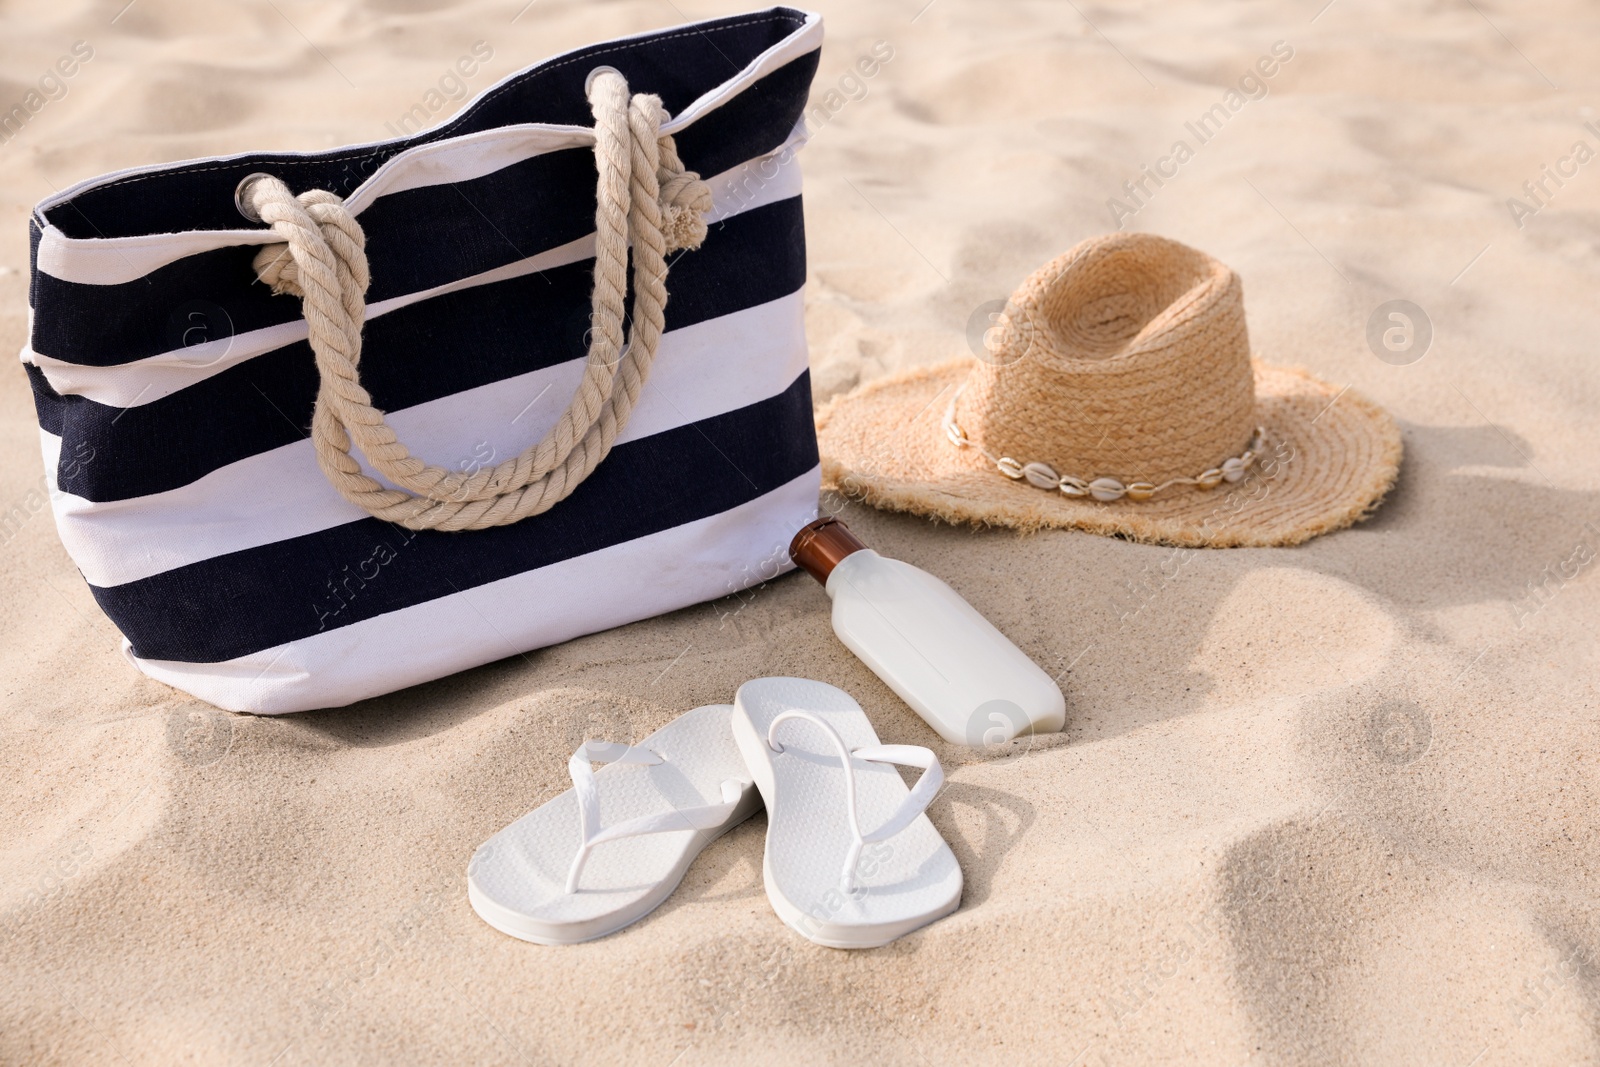 Photo of Beach bag, flip flops, sunscreen and hat on sand